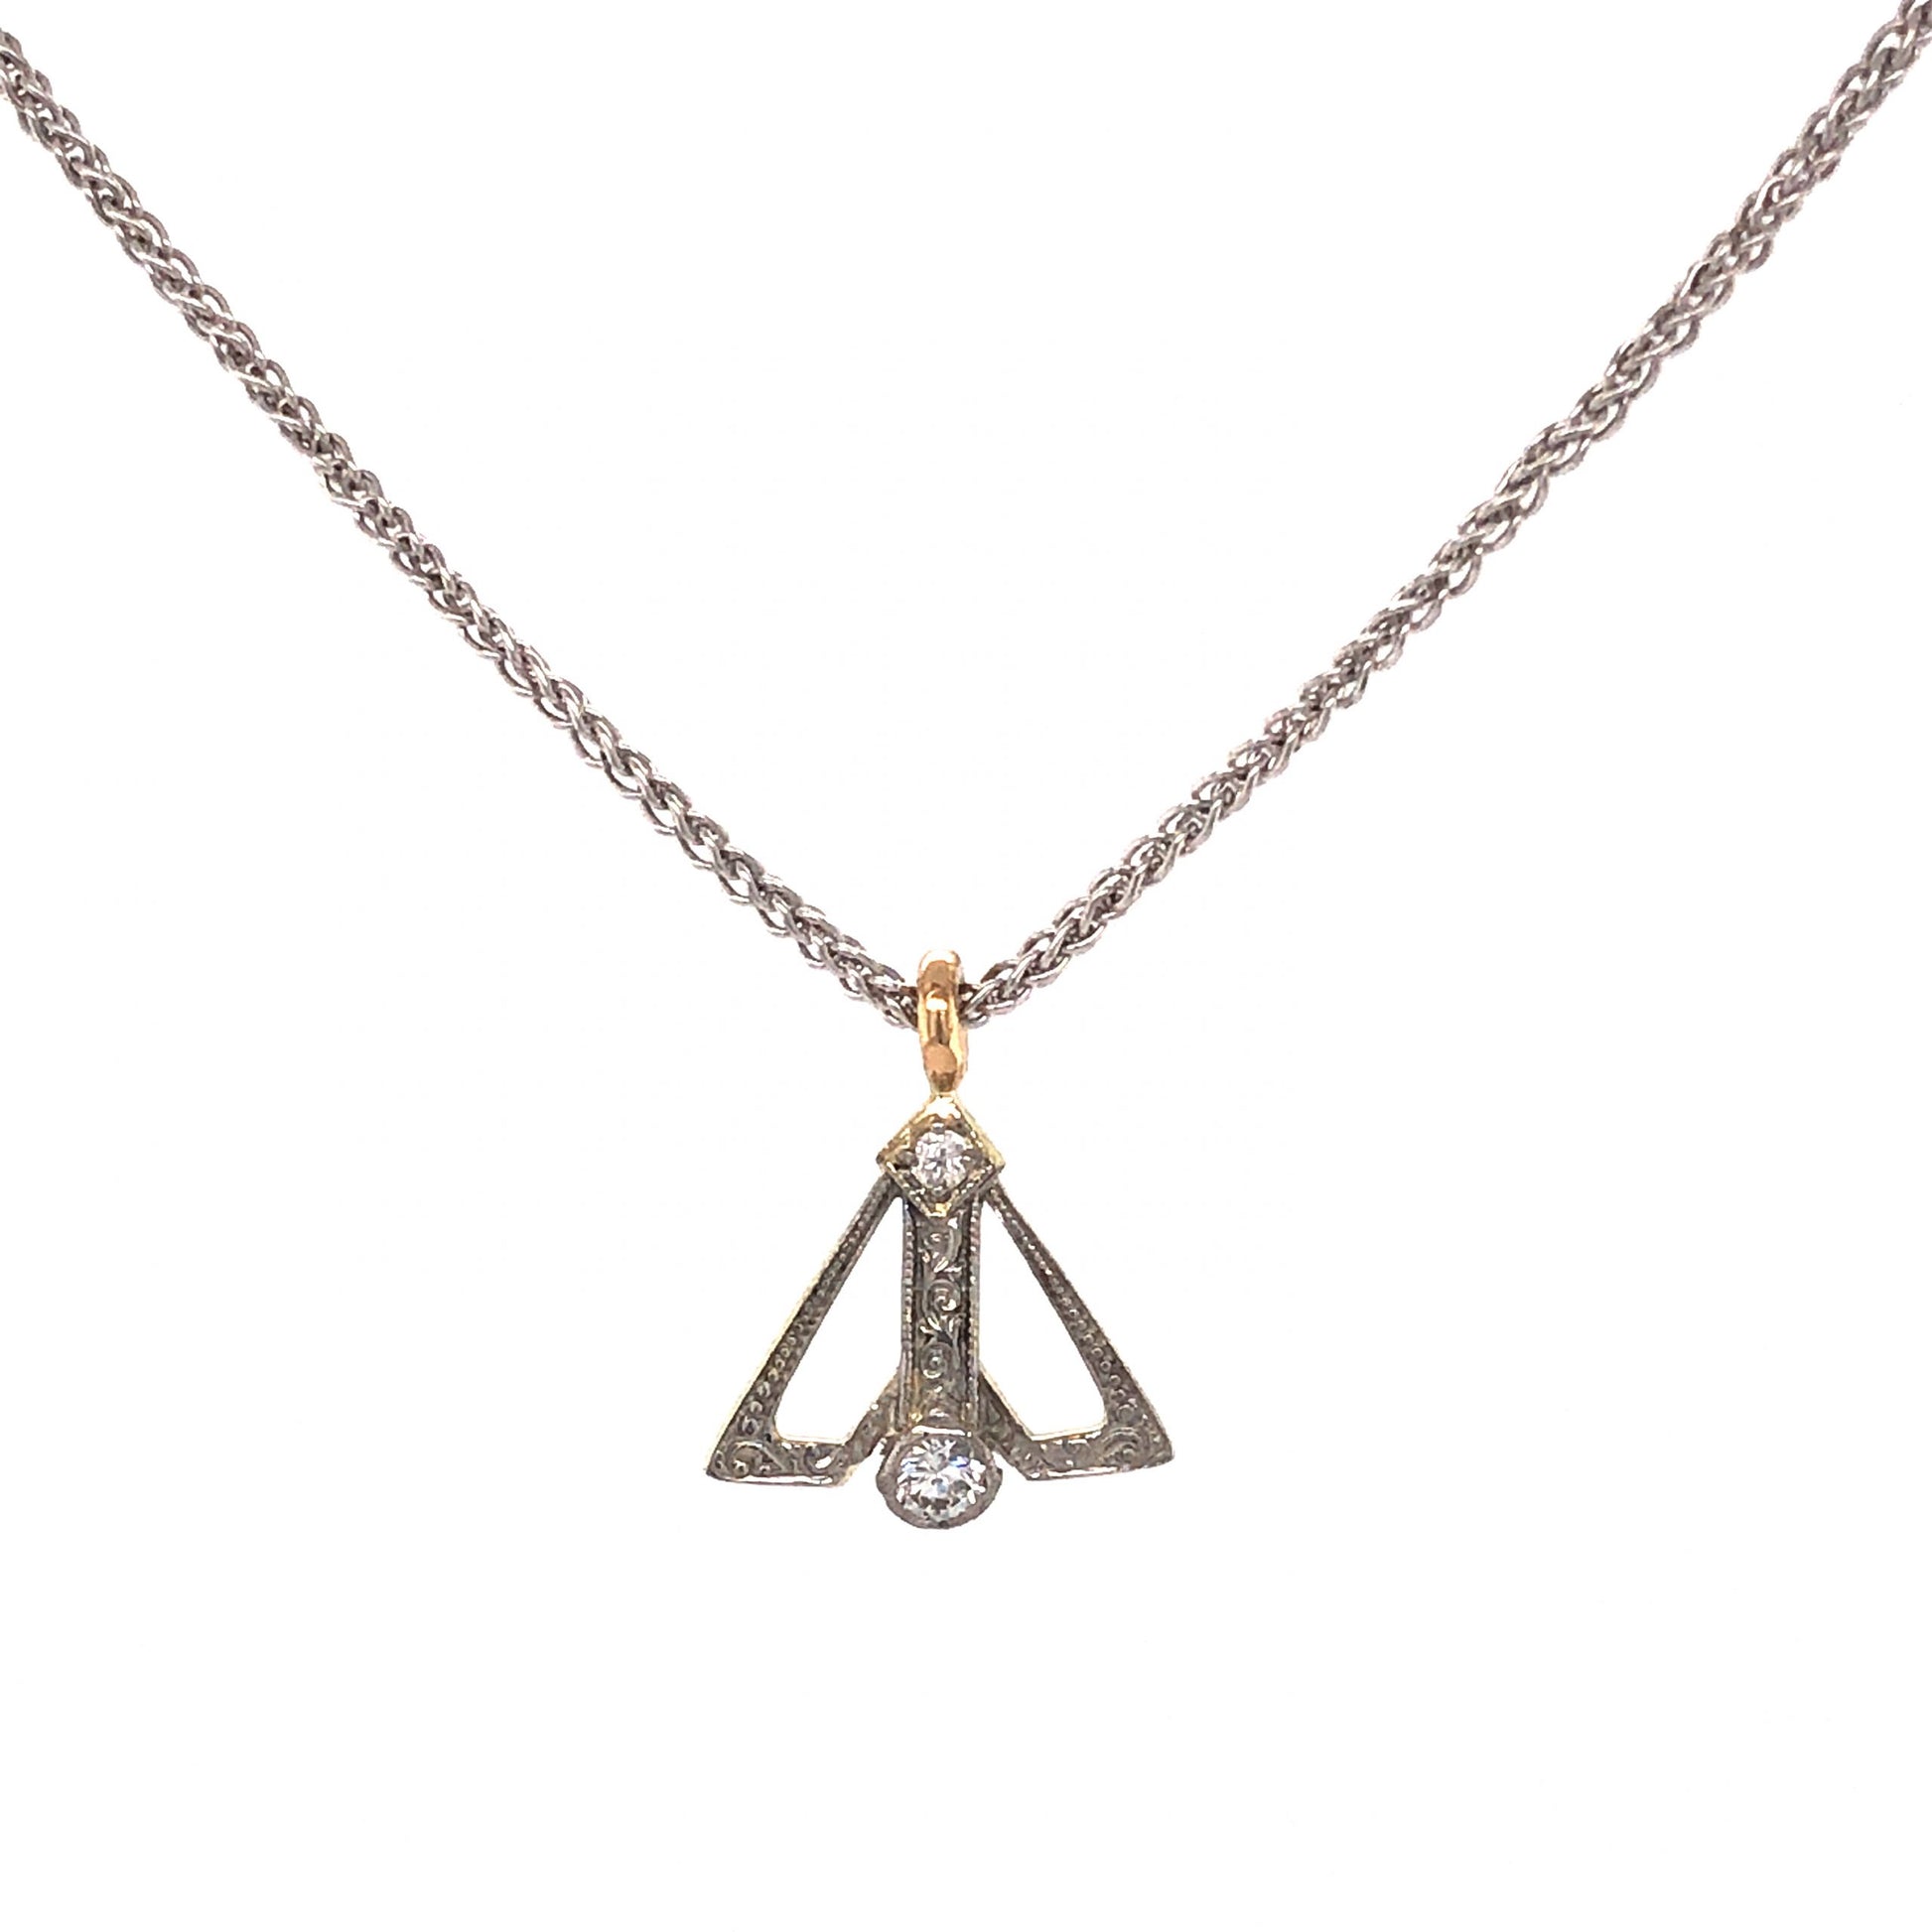 Two-Toned Art Deco Diamond Pendant Necklace in 14k Gold